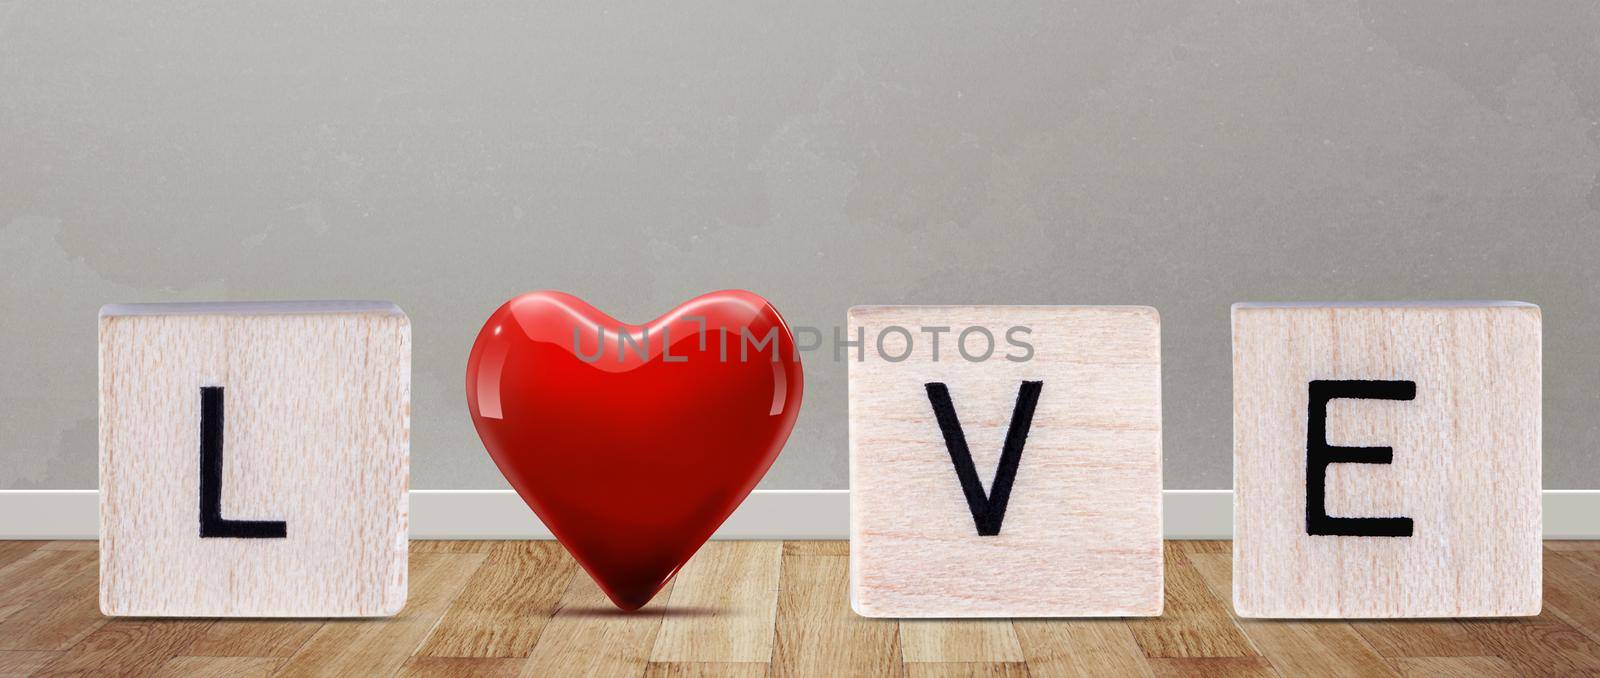 Valentine's Day background. Concept of human emotions, love, relations and romantic holidays. 3d illustration